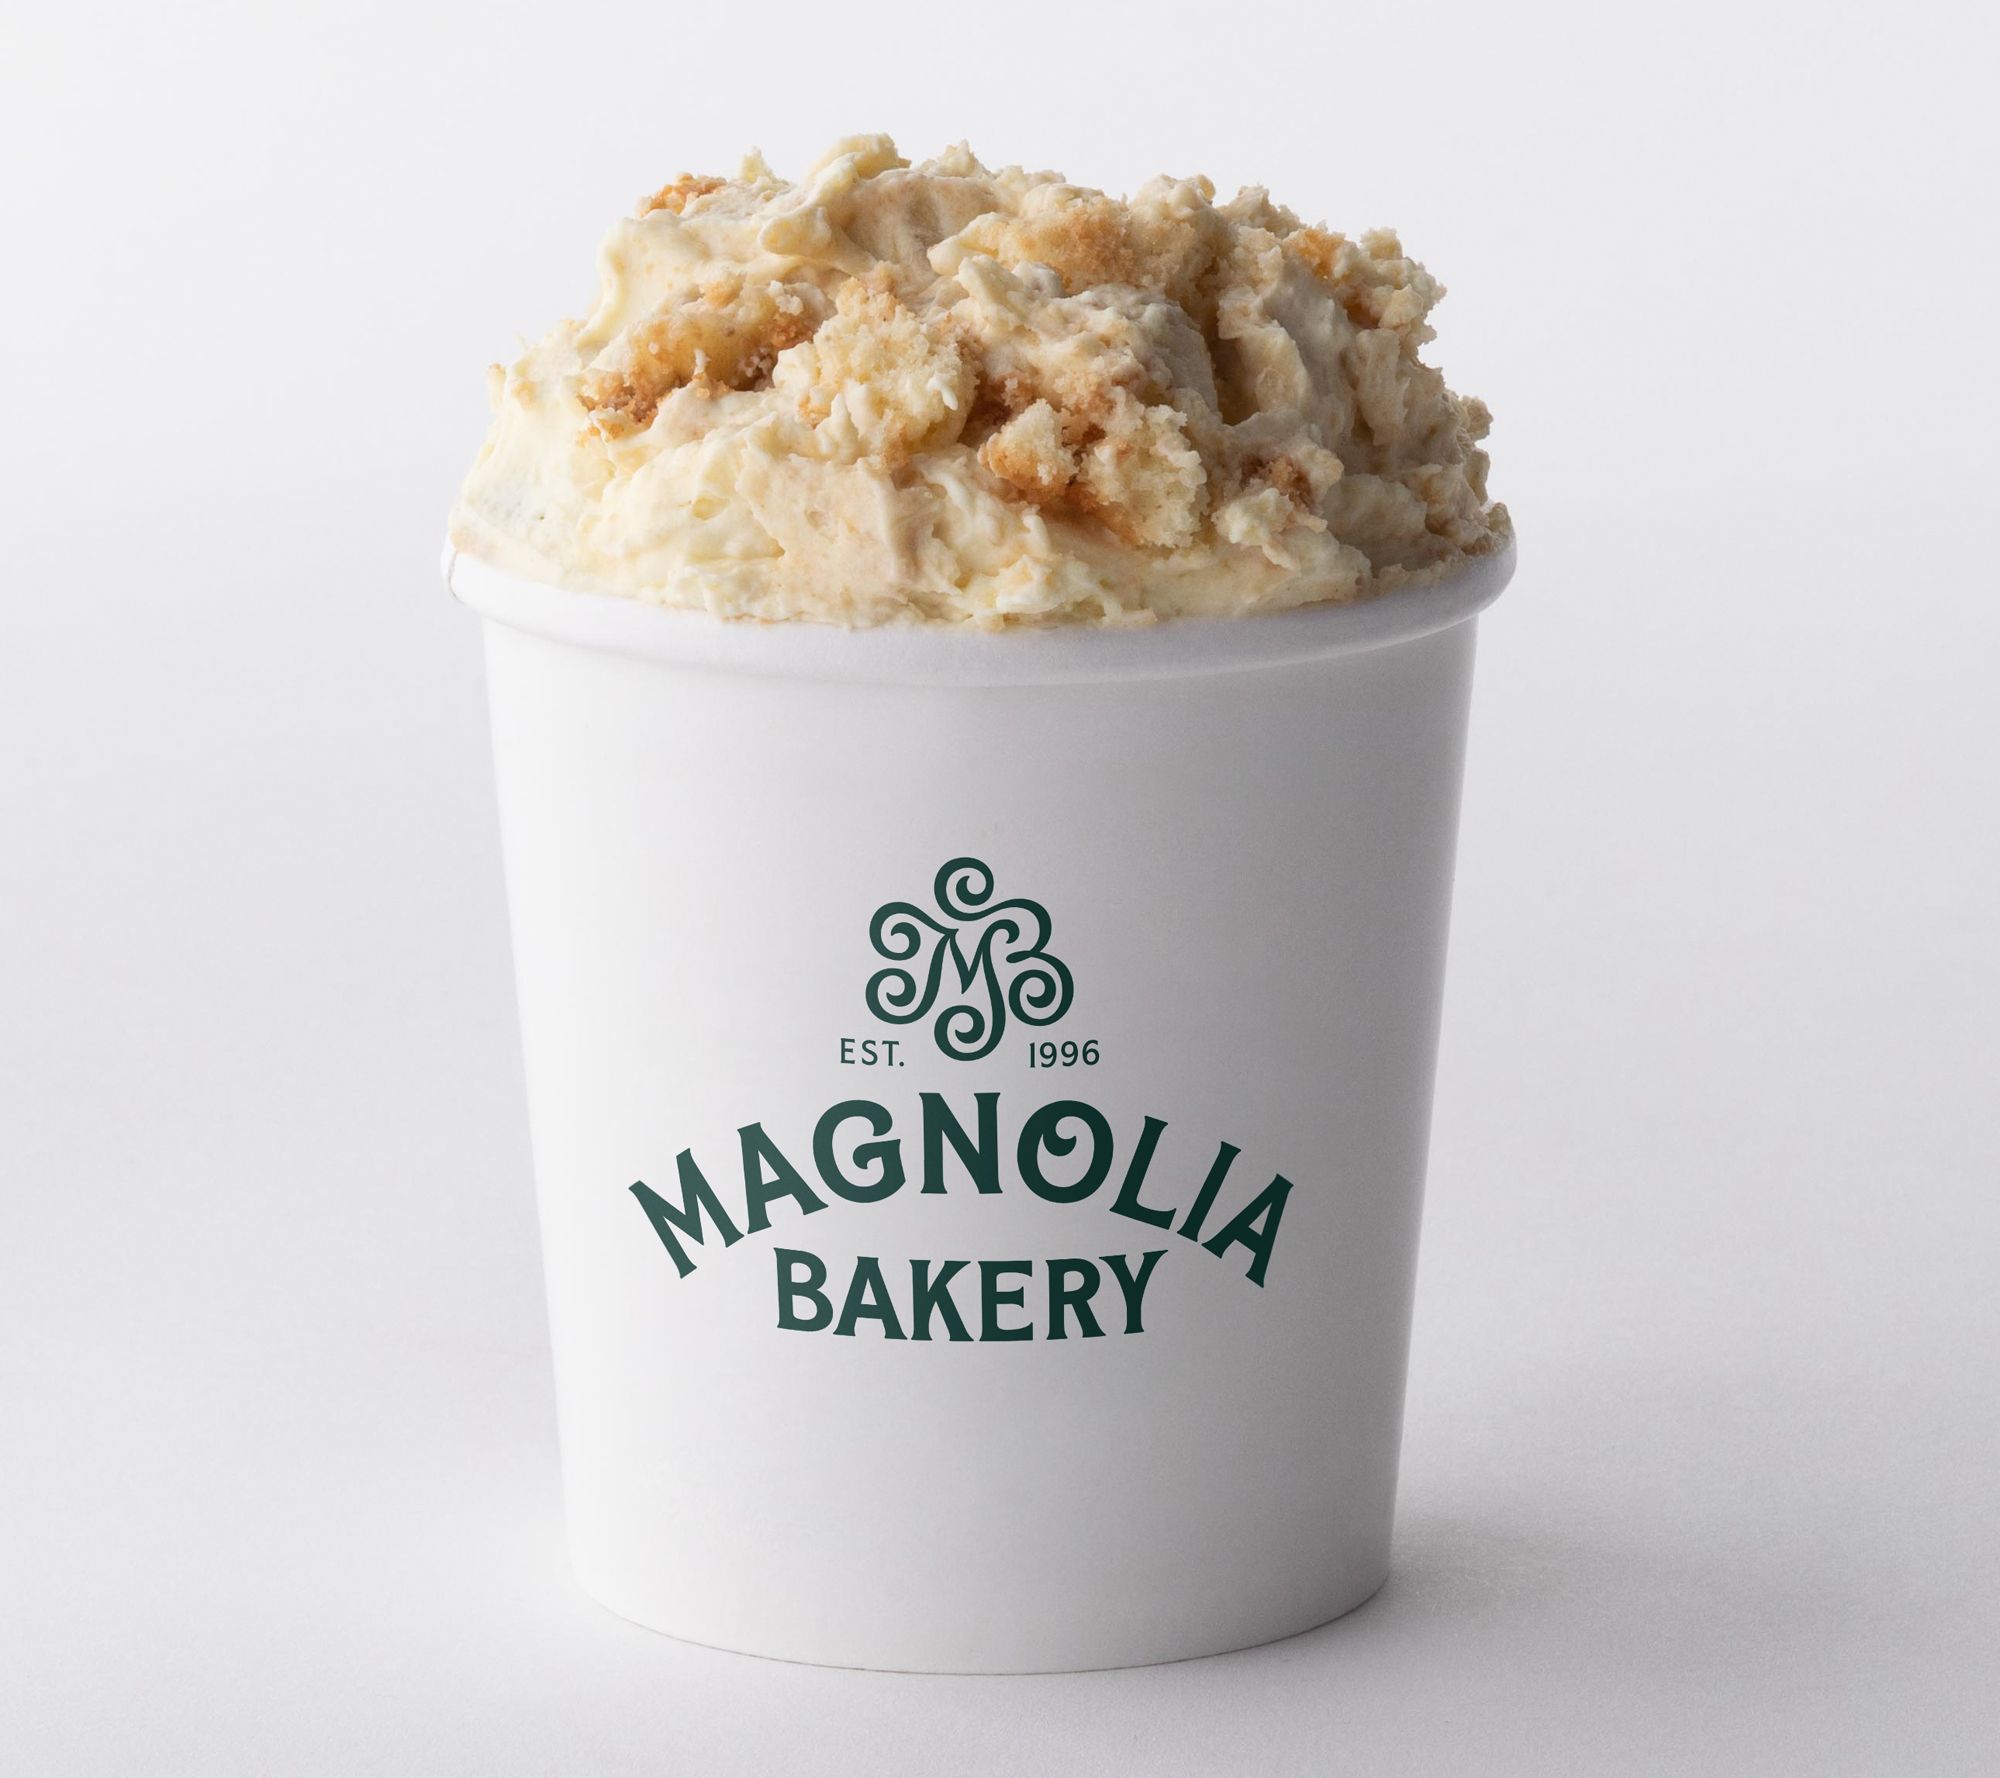 Magnolia Bakery's Banana Pudding Is Now a Scented Candle